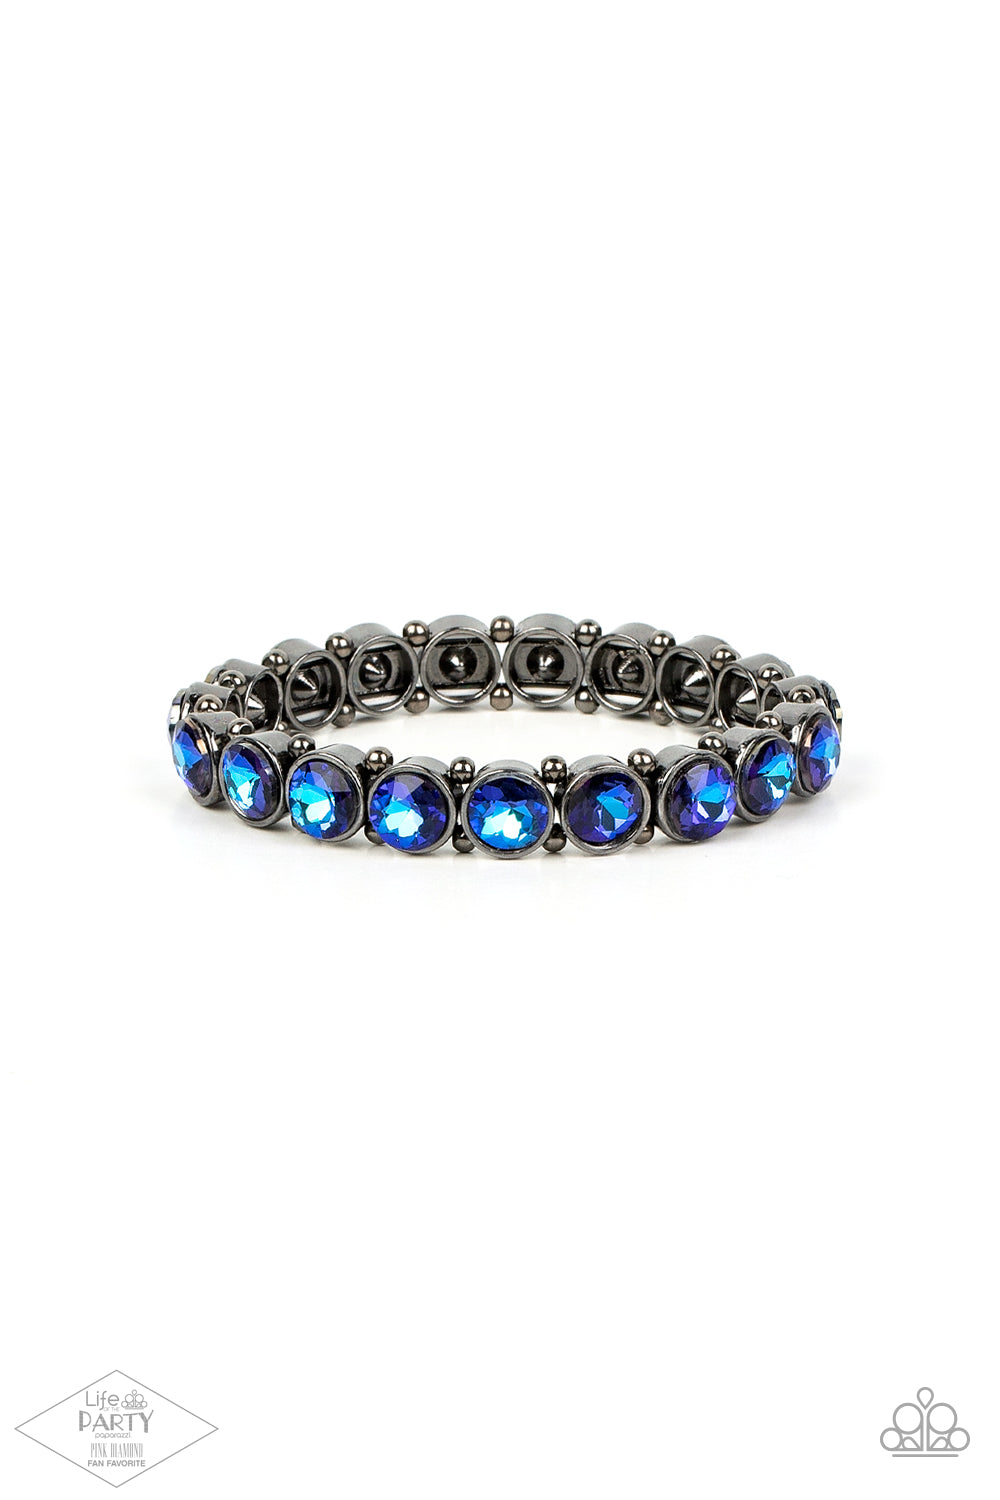 Sugar-Coated Sparkle Multi Bracelet - Paparazzi Accessories  Infused with dainty gunmetal beads, iridescent blue rhinestone encrusted frames are threaded along stretchy bands around the wrist for a glamorous look.  Sold as one individual bracelet.  New KitFANFAVORITE This Fan Favorite is back in the spotlight at the request of our 2021 Life of the Party member with Pink Diamond Access, Ashley G.